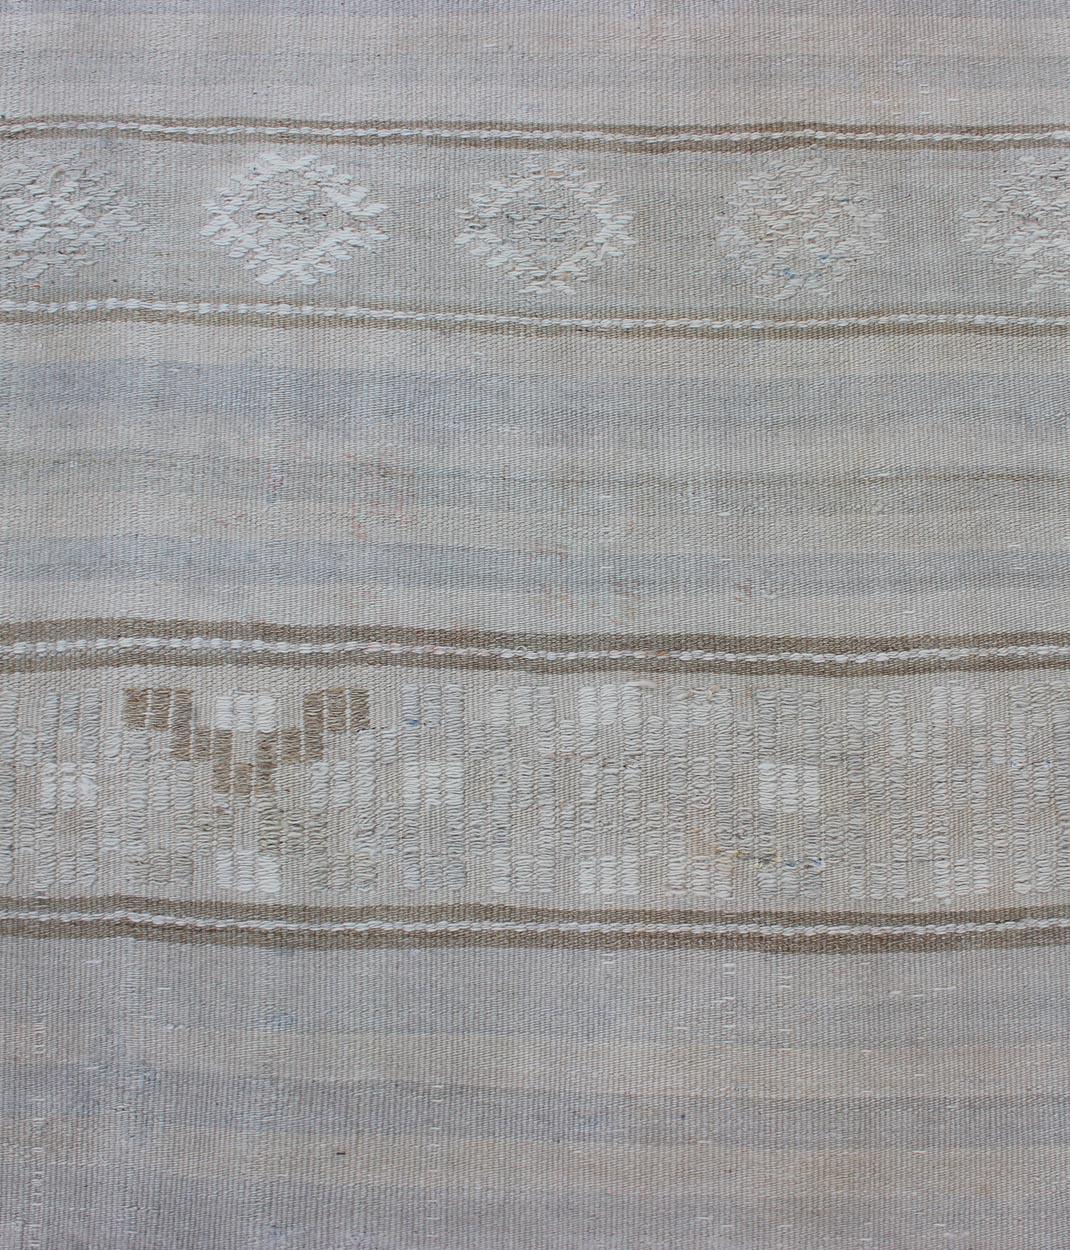 Vintage Turkish Kilim Runner with Stripes in Light Grey and Muted Tones For Sale 2